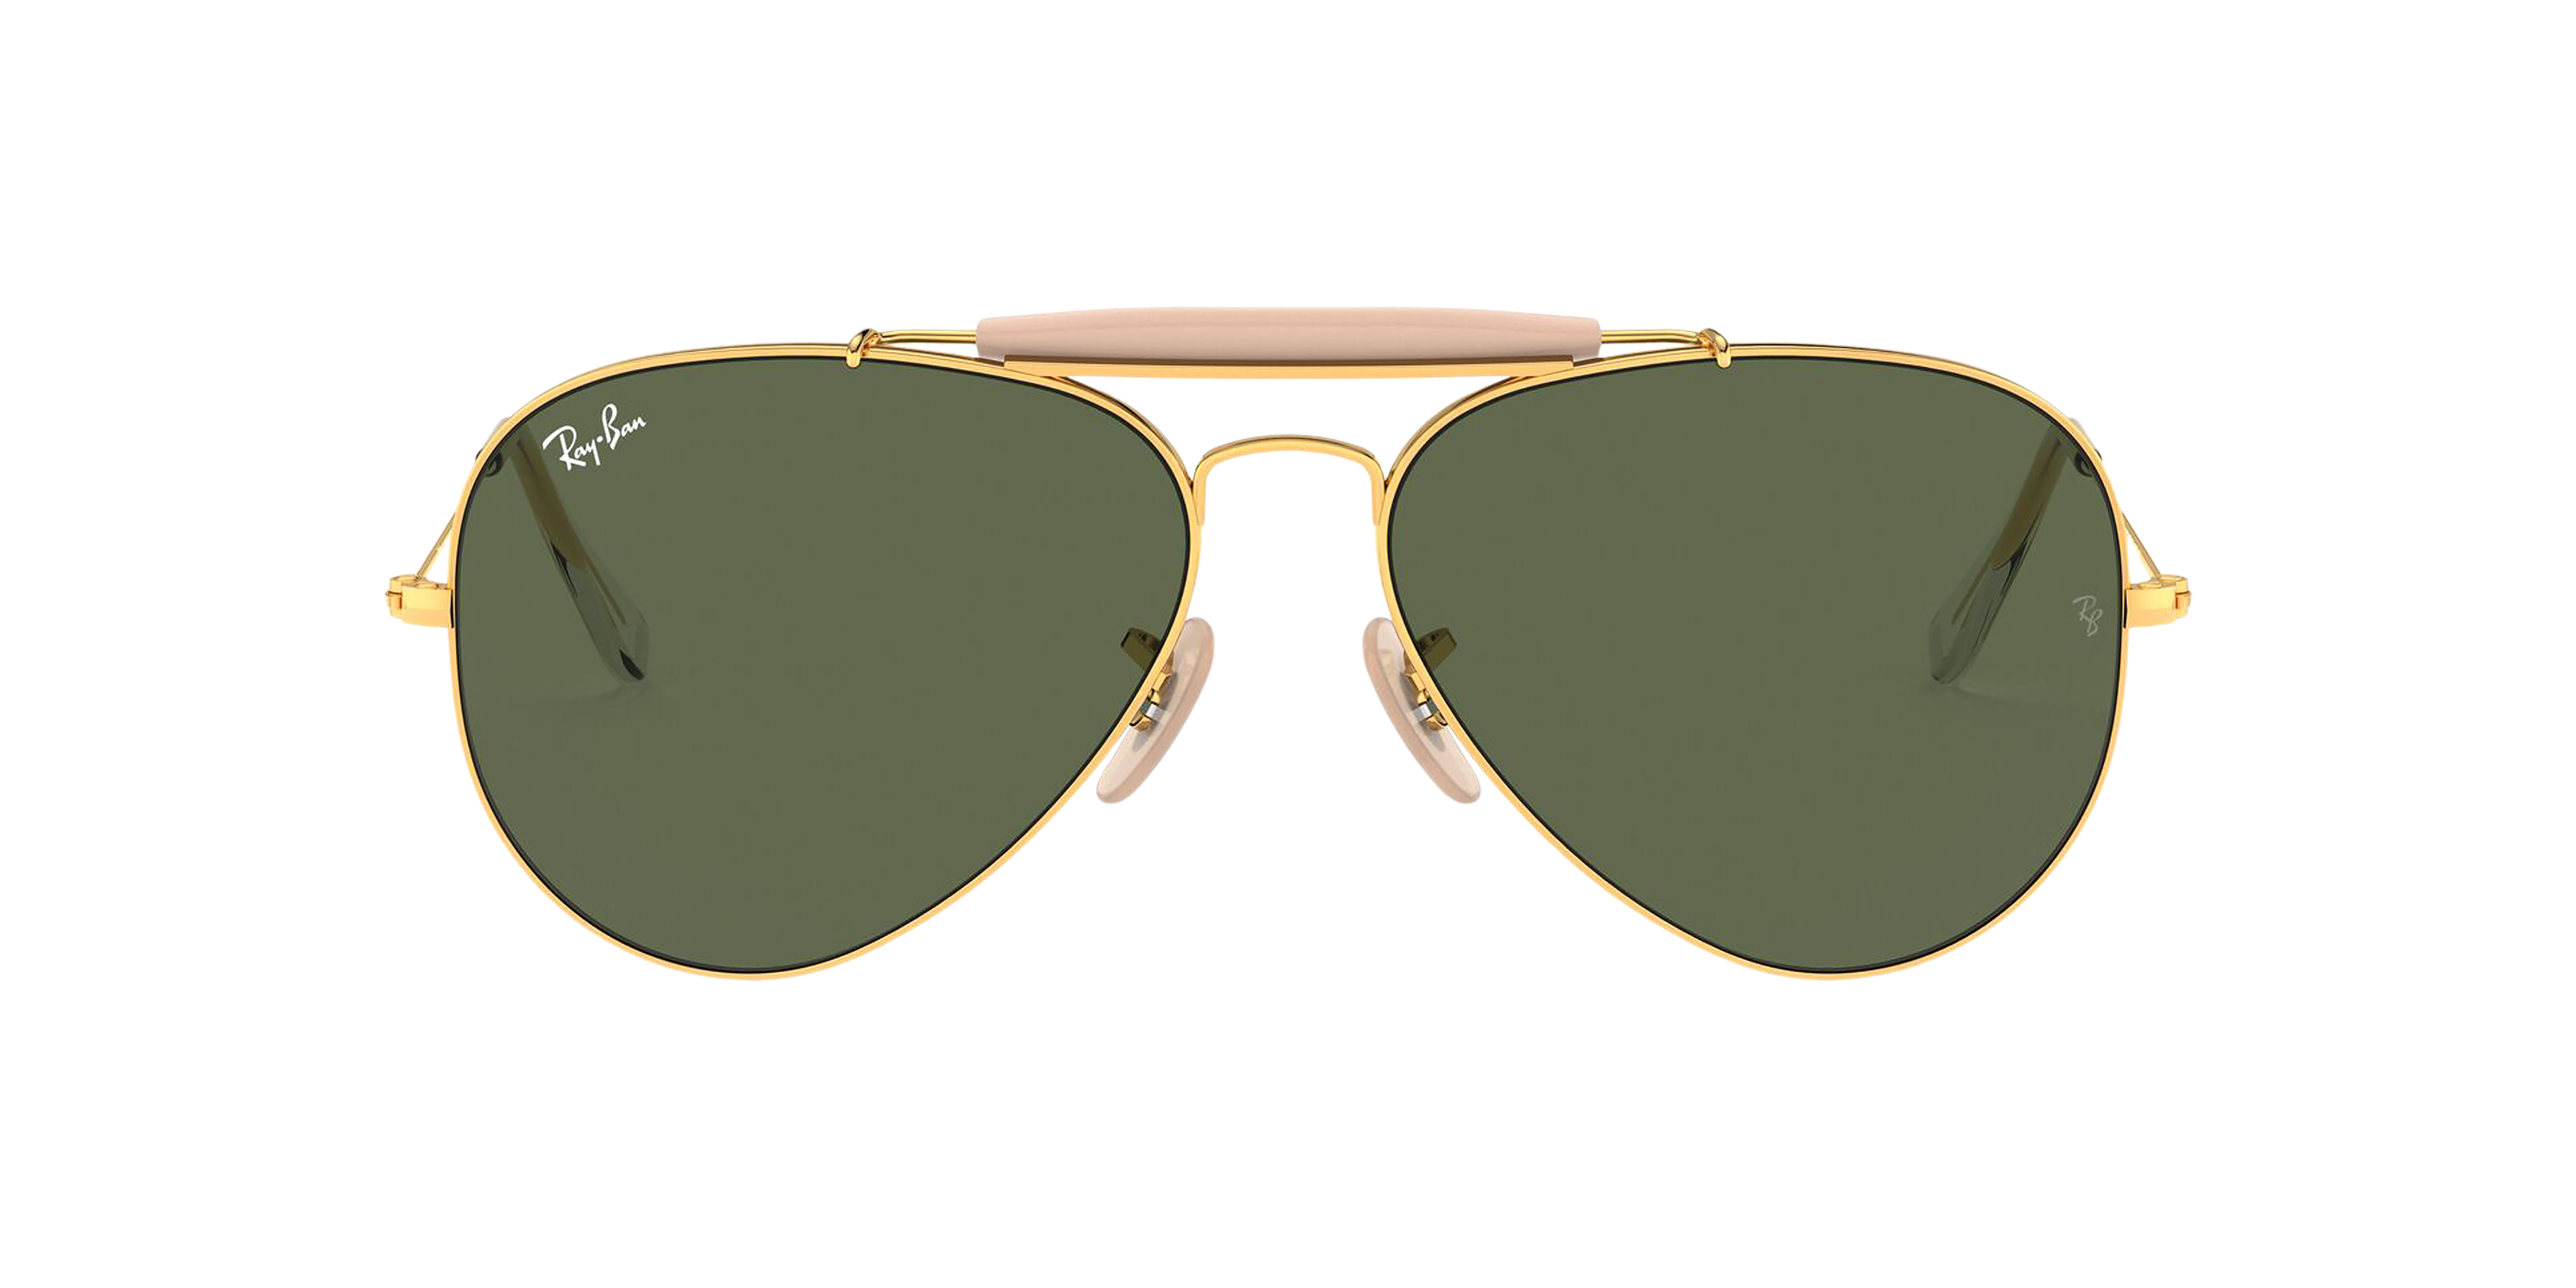 [products.image.front] Ray-Ban Outdoorsman II RB3029 L2112